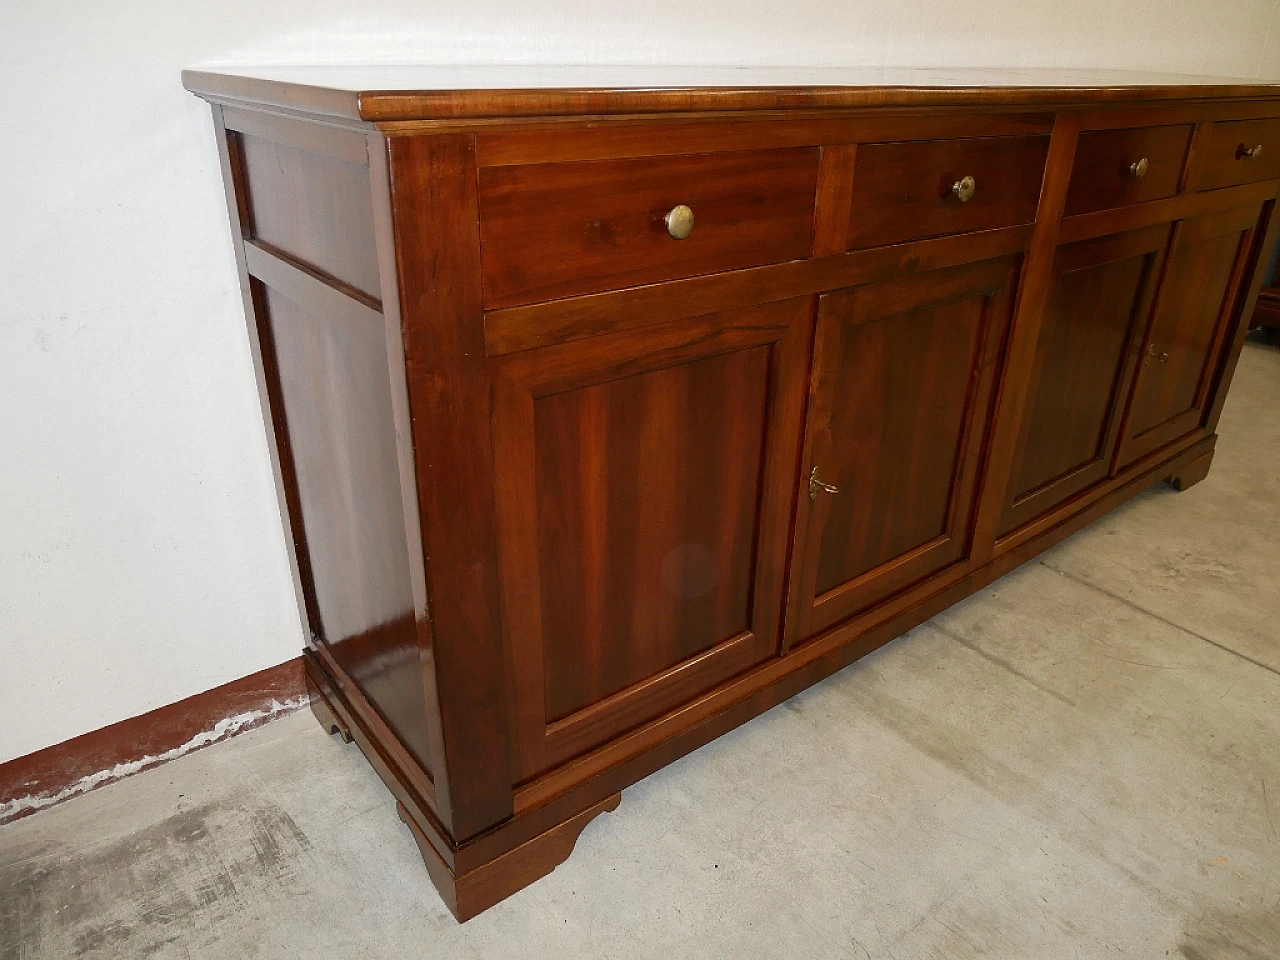 Solid walnut four-door sideboard, late 19th century 2